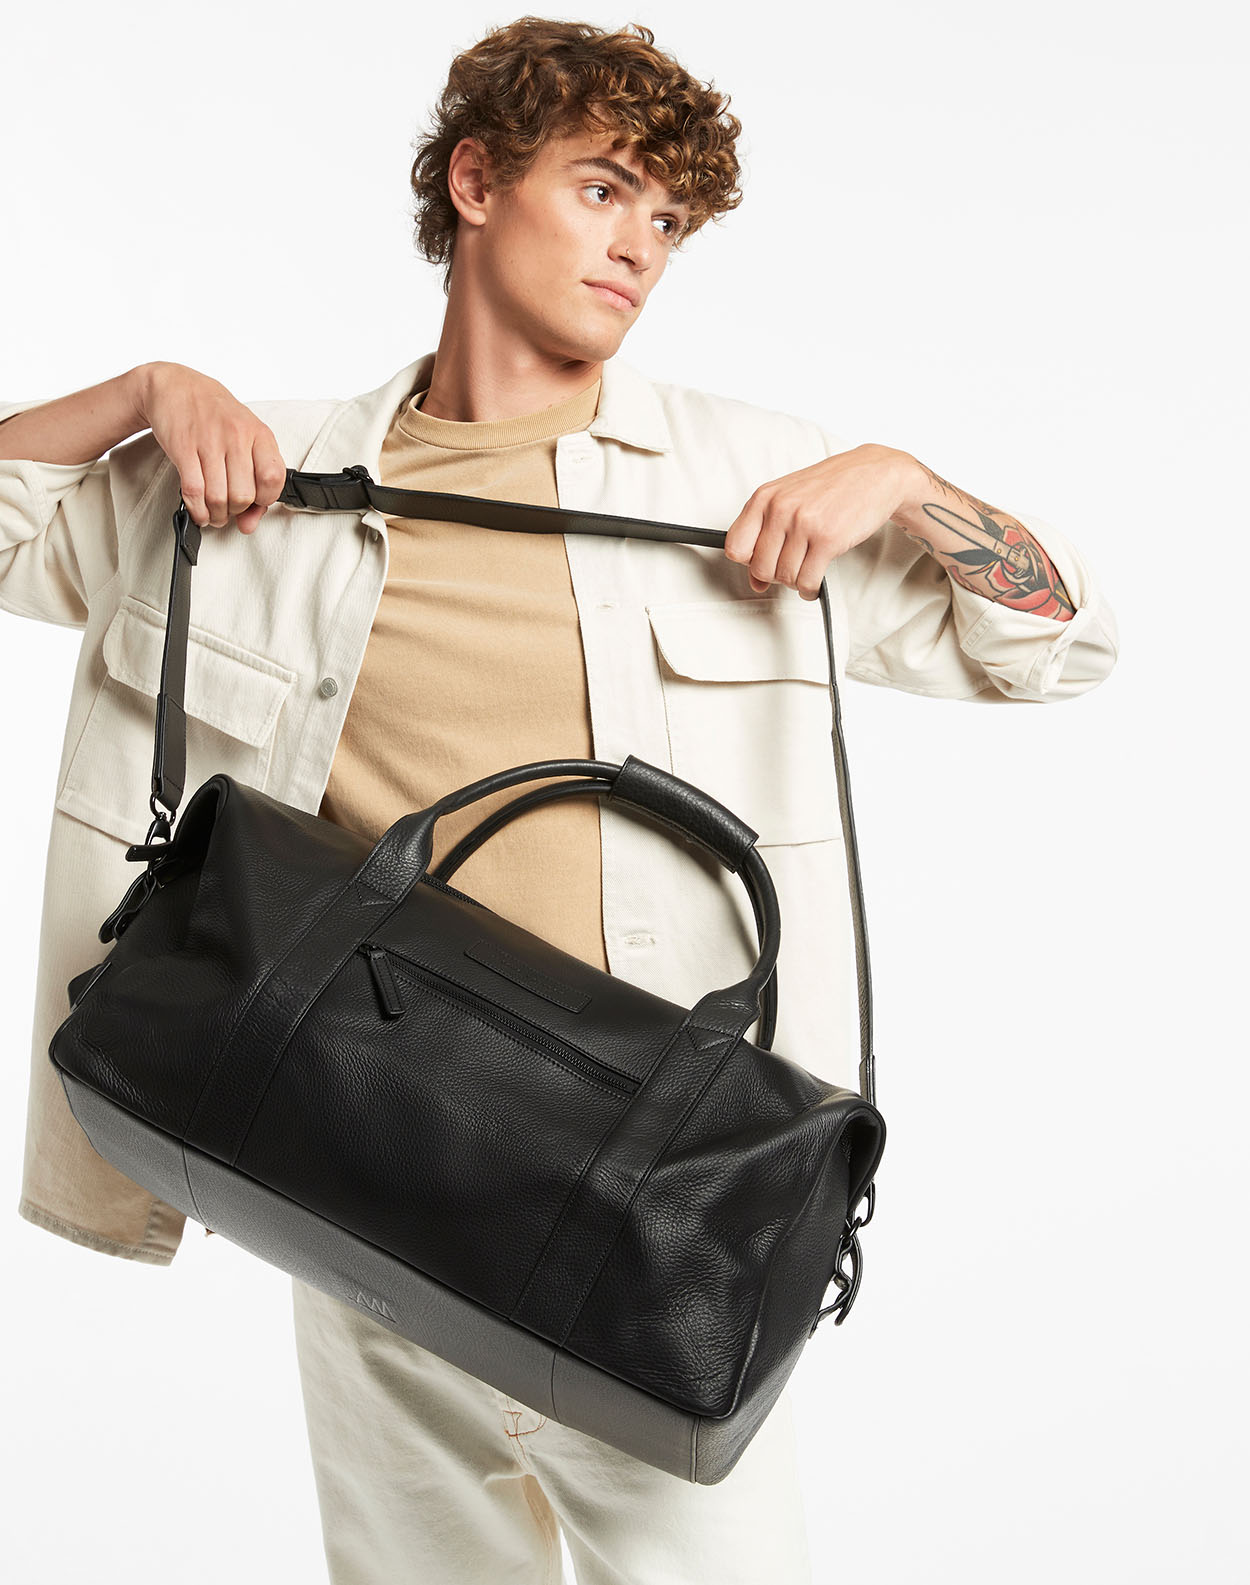 Status Anxiety Men's Leather Bags